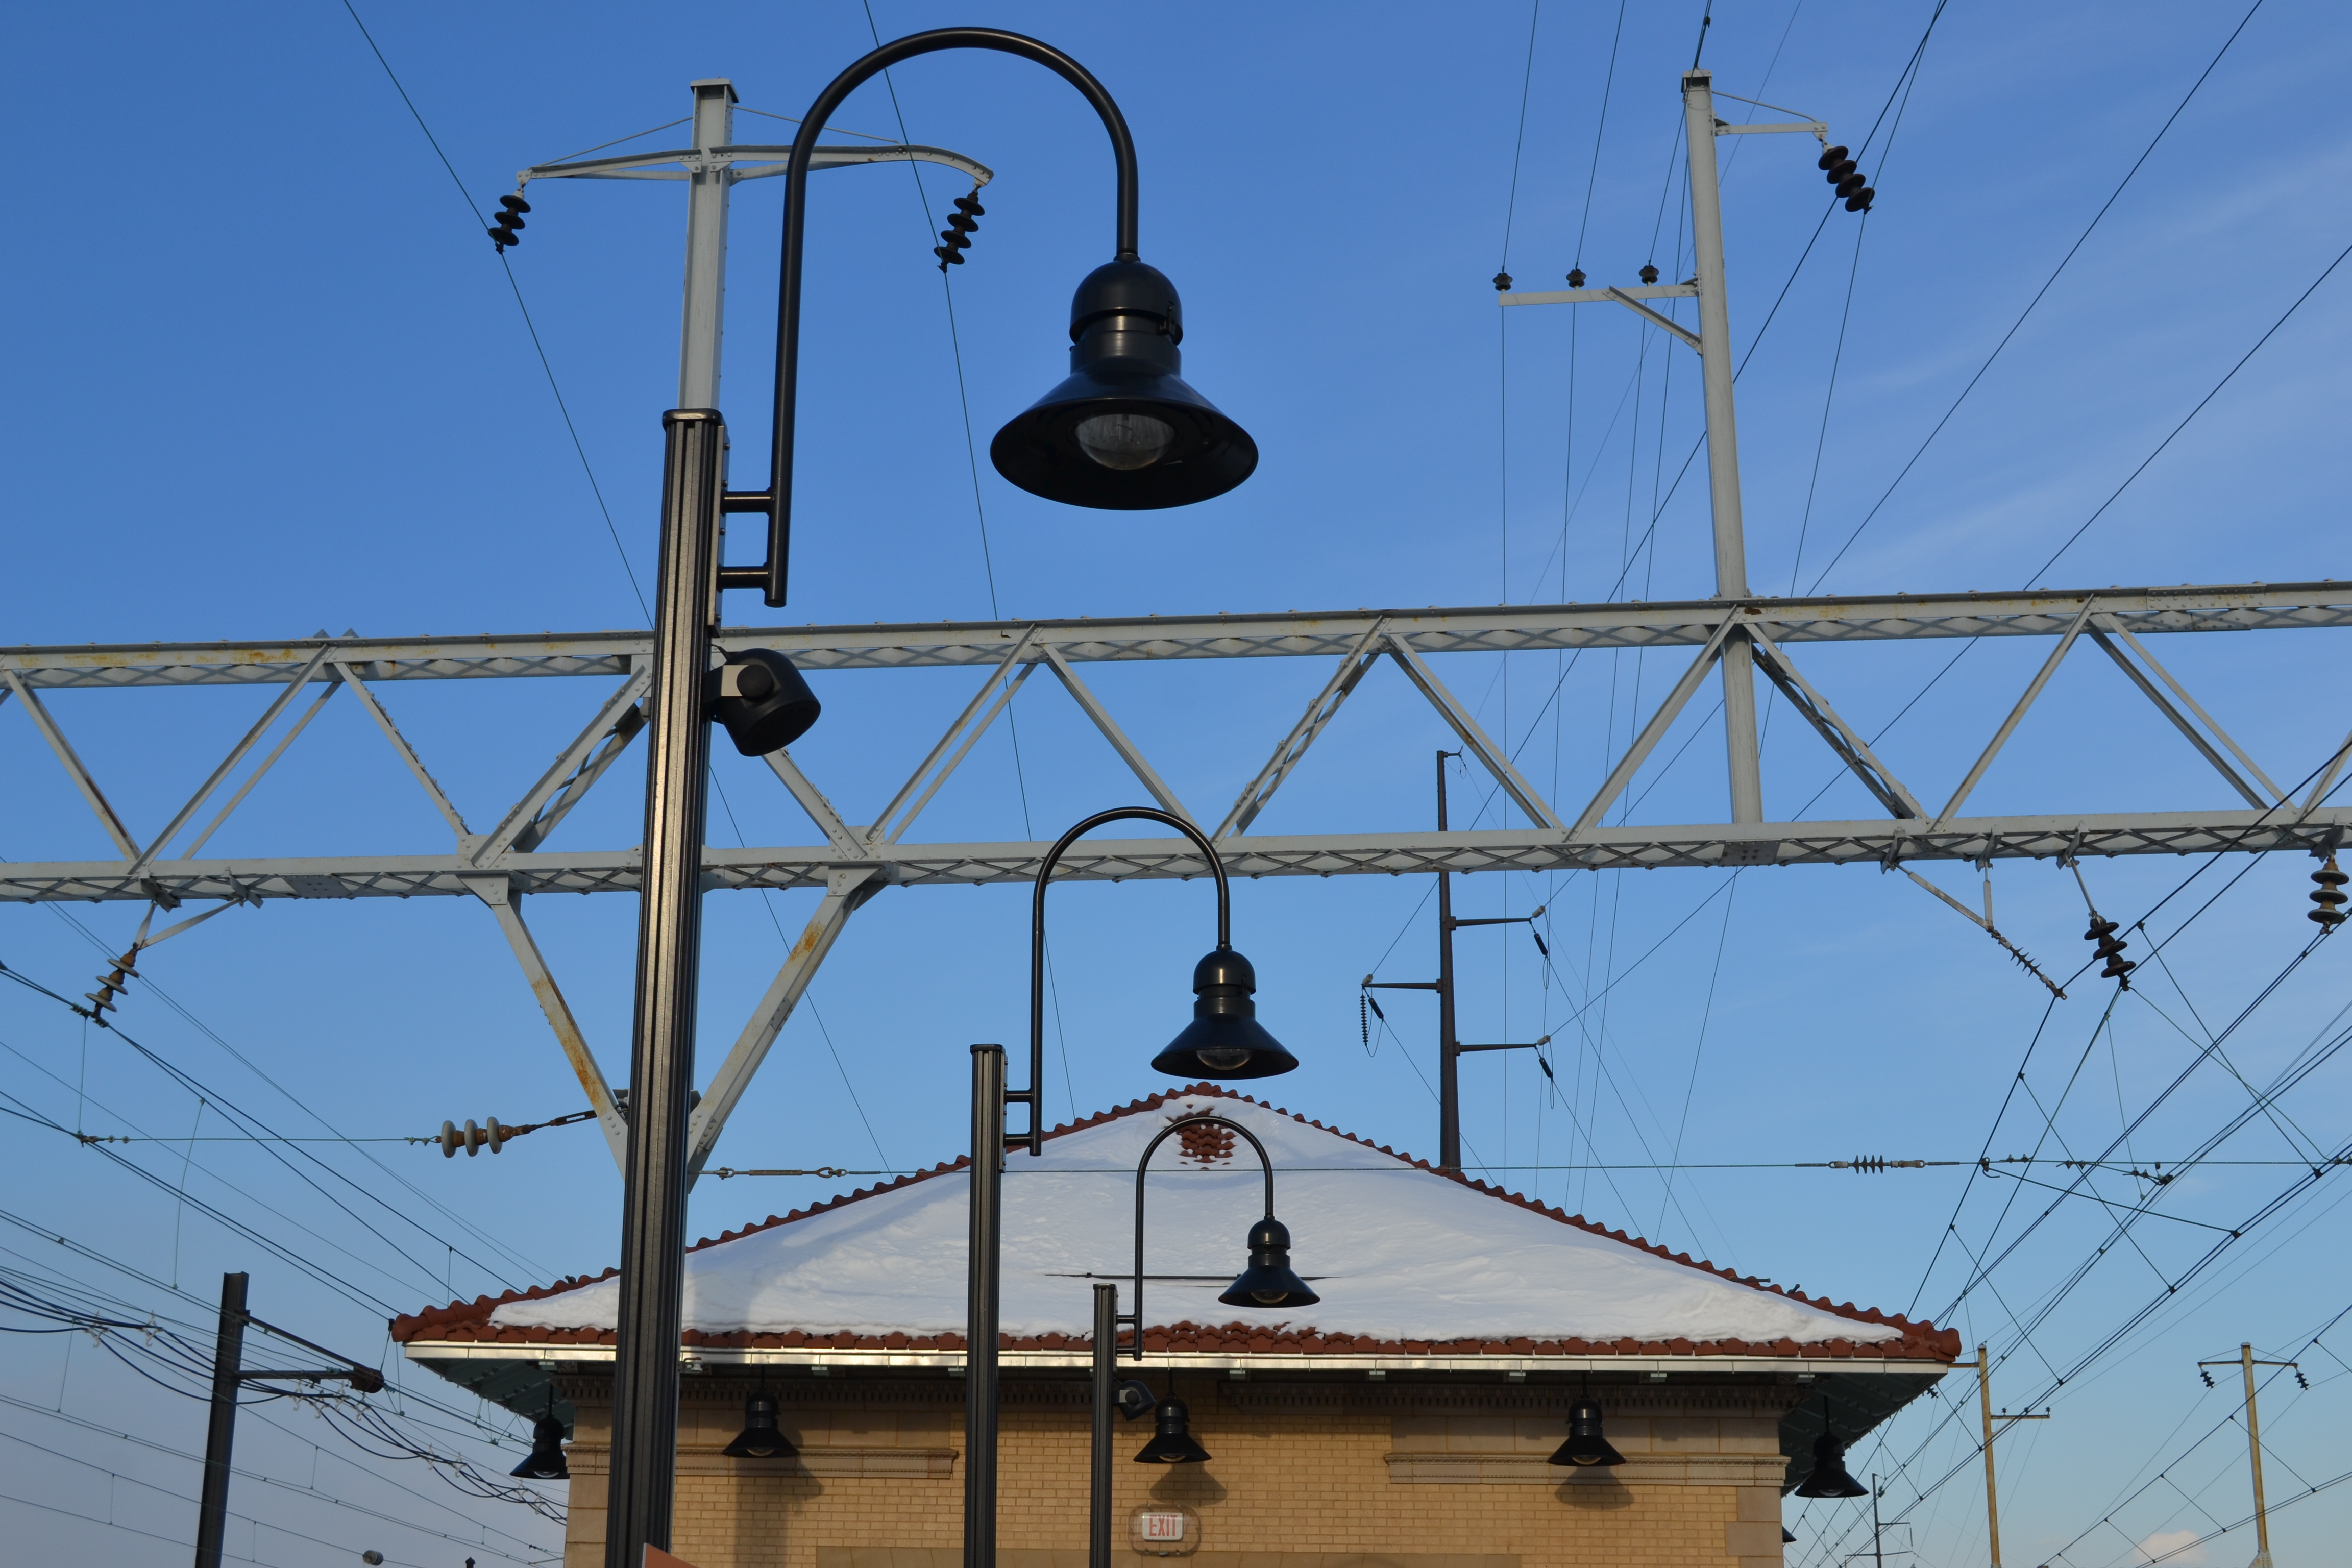 New lighting was installed as part of the platform renovations